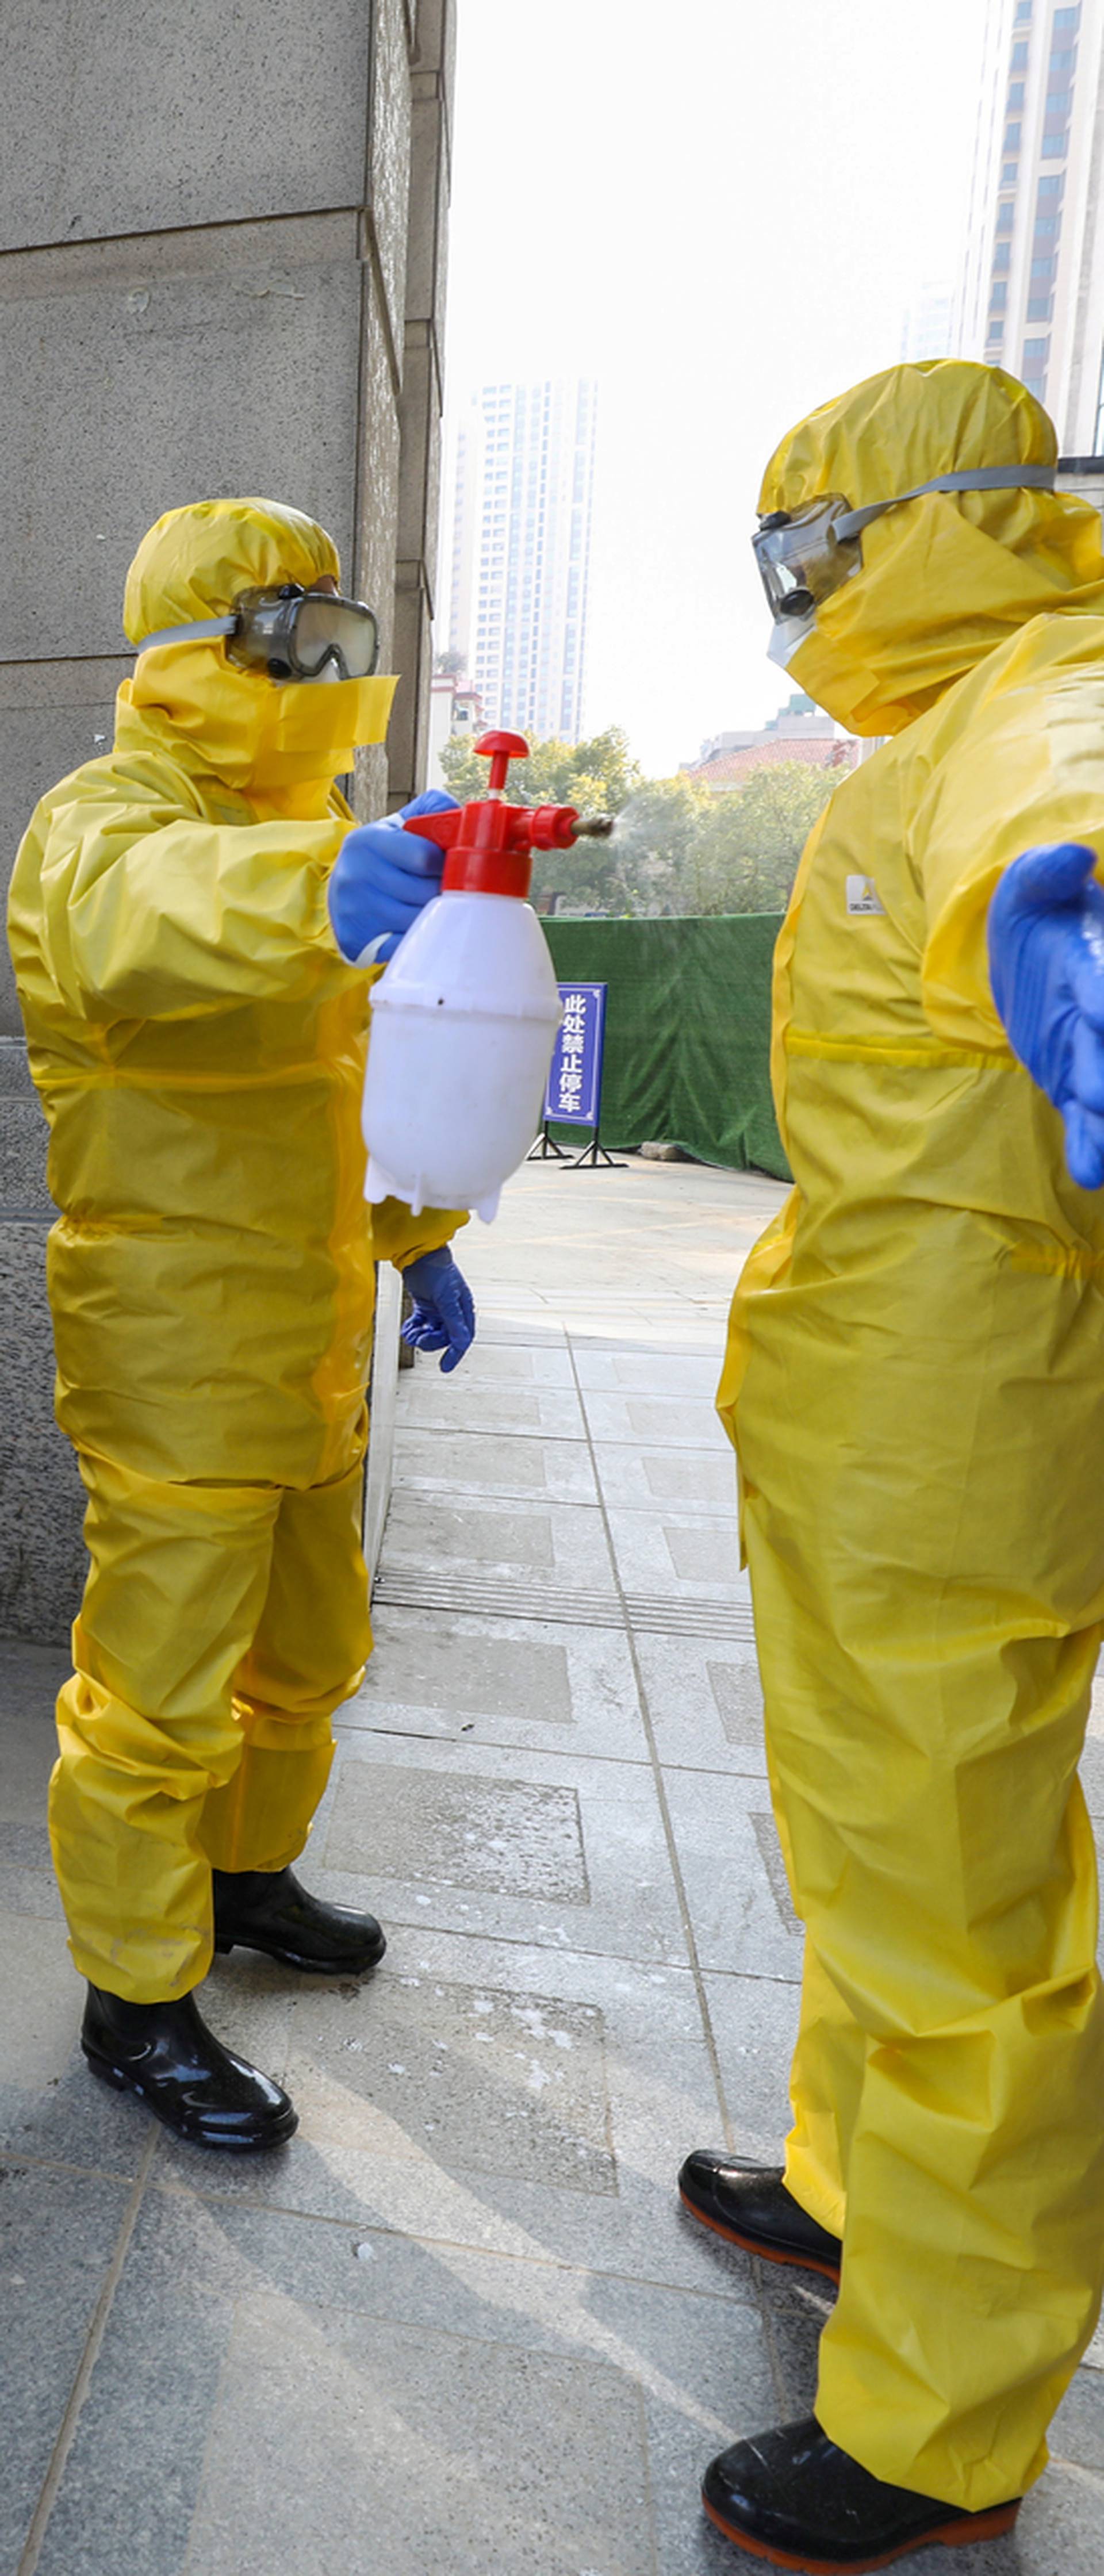 FILE PHOTO: Funeral parlour staff members in protective suits help a colleague with disinfection after they transferred a body at a hospital, following the outbreak of a new coronavirus in Wuhan